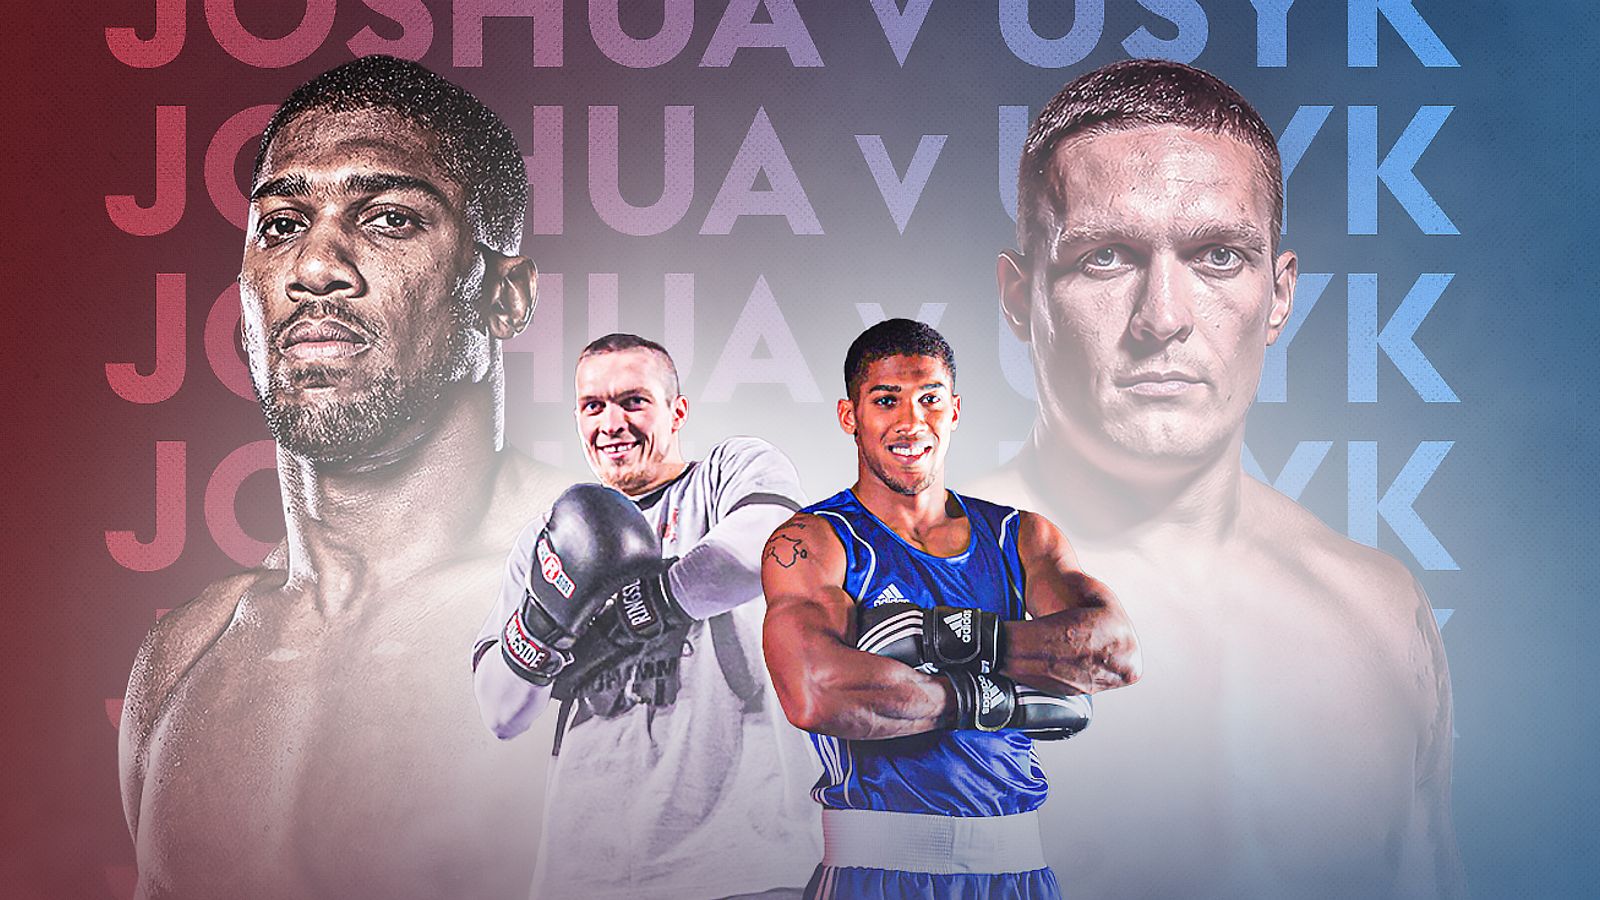 Usyks 10-year plot to bring AJ down Boxing News Sky Sports